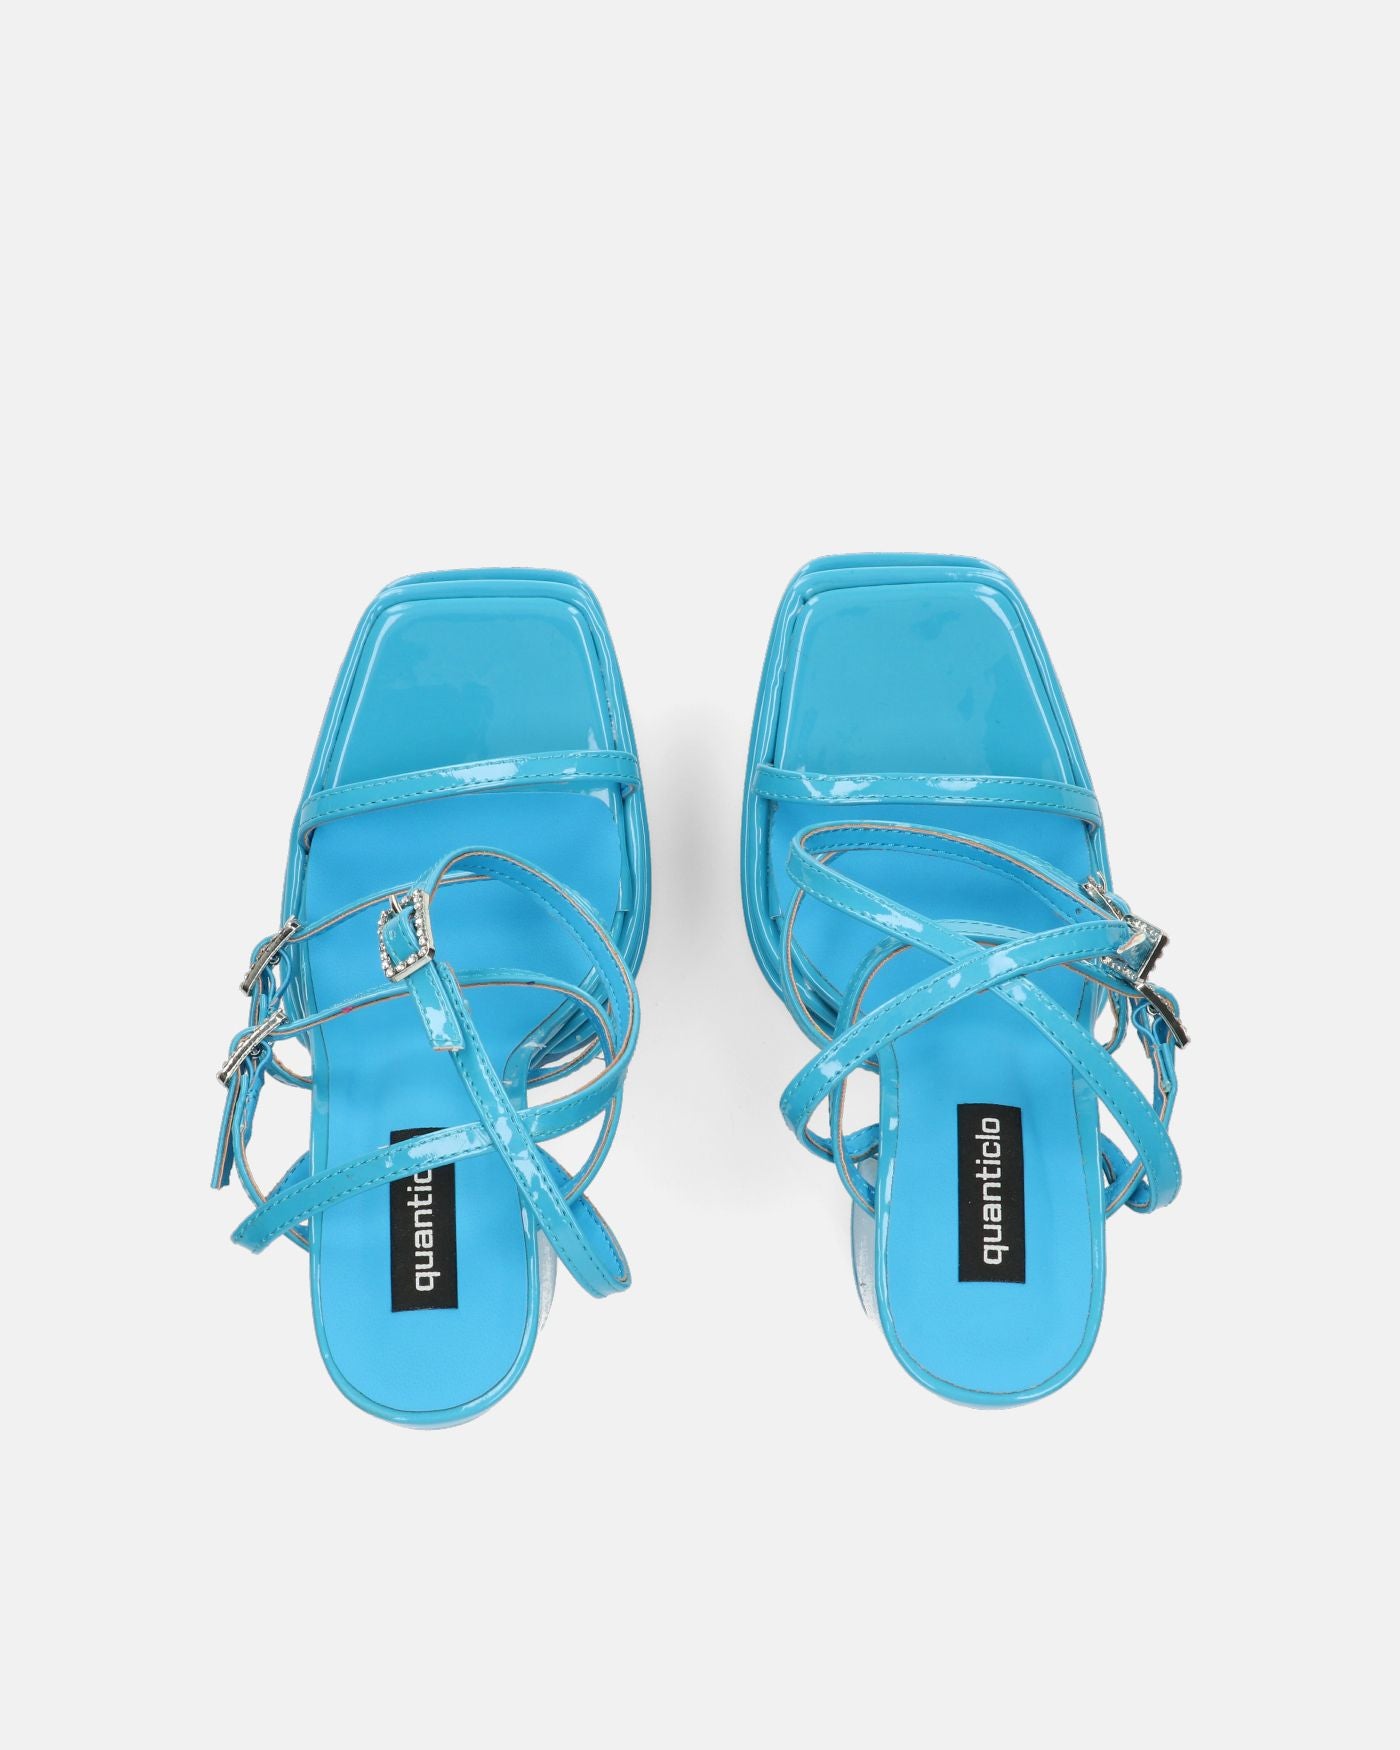 TEXA - sandals with strap and high heel in light blue